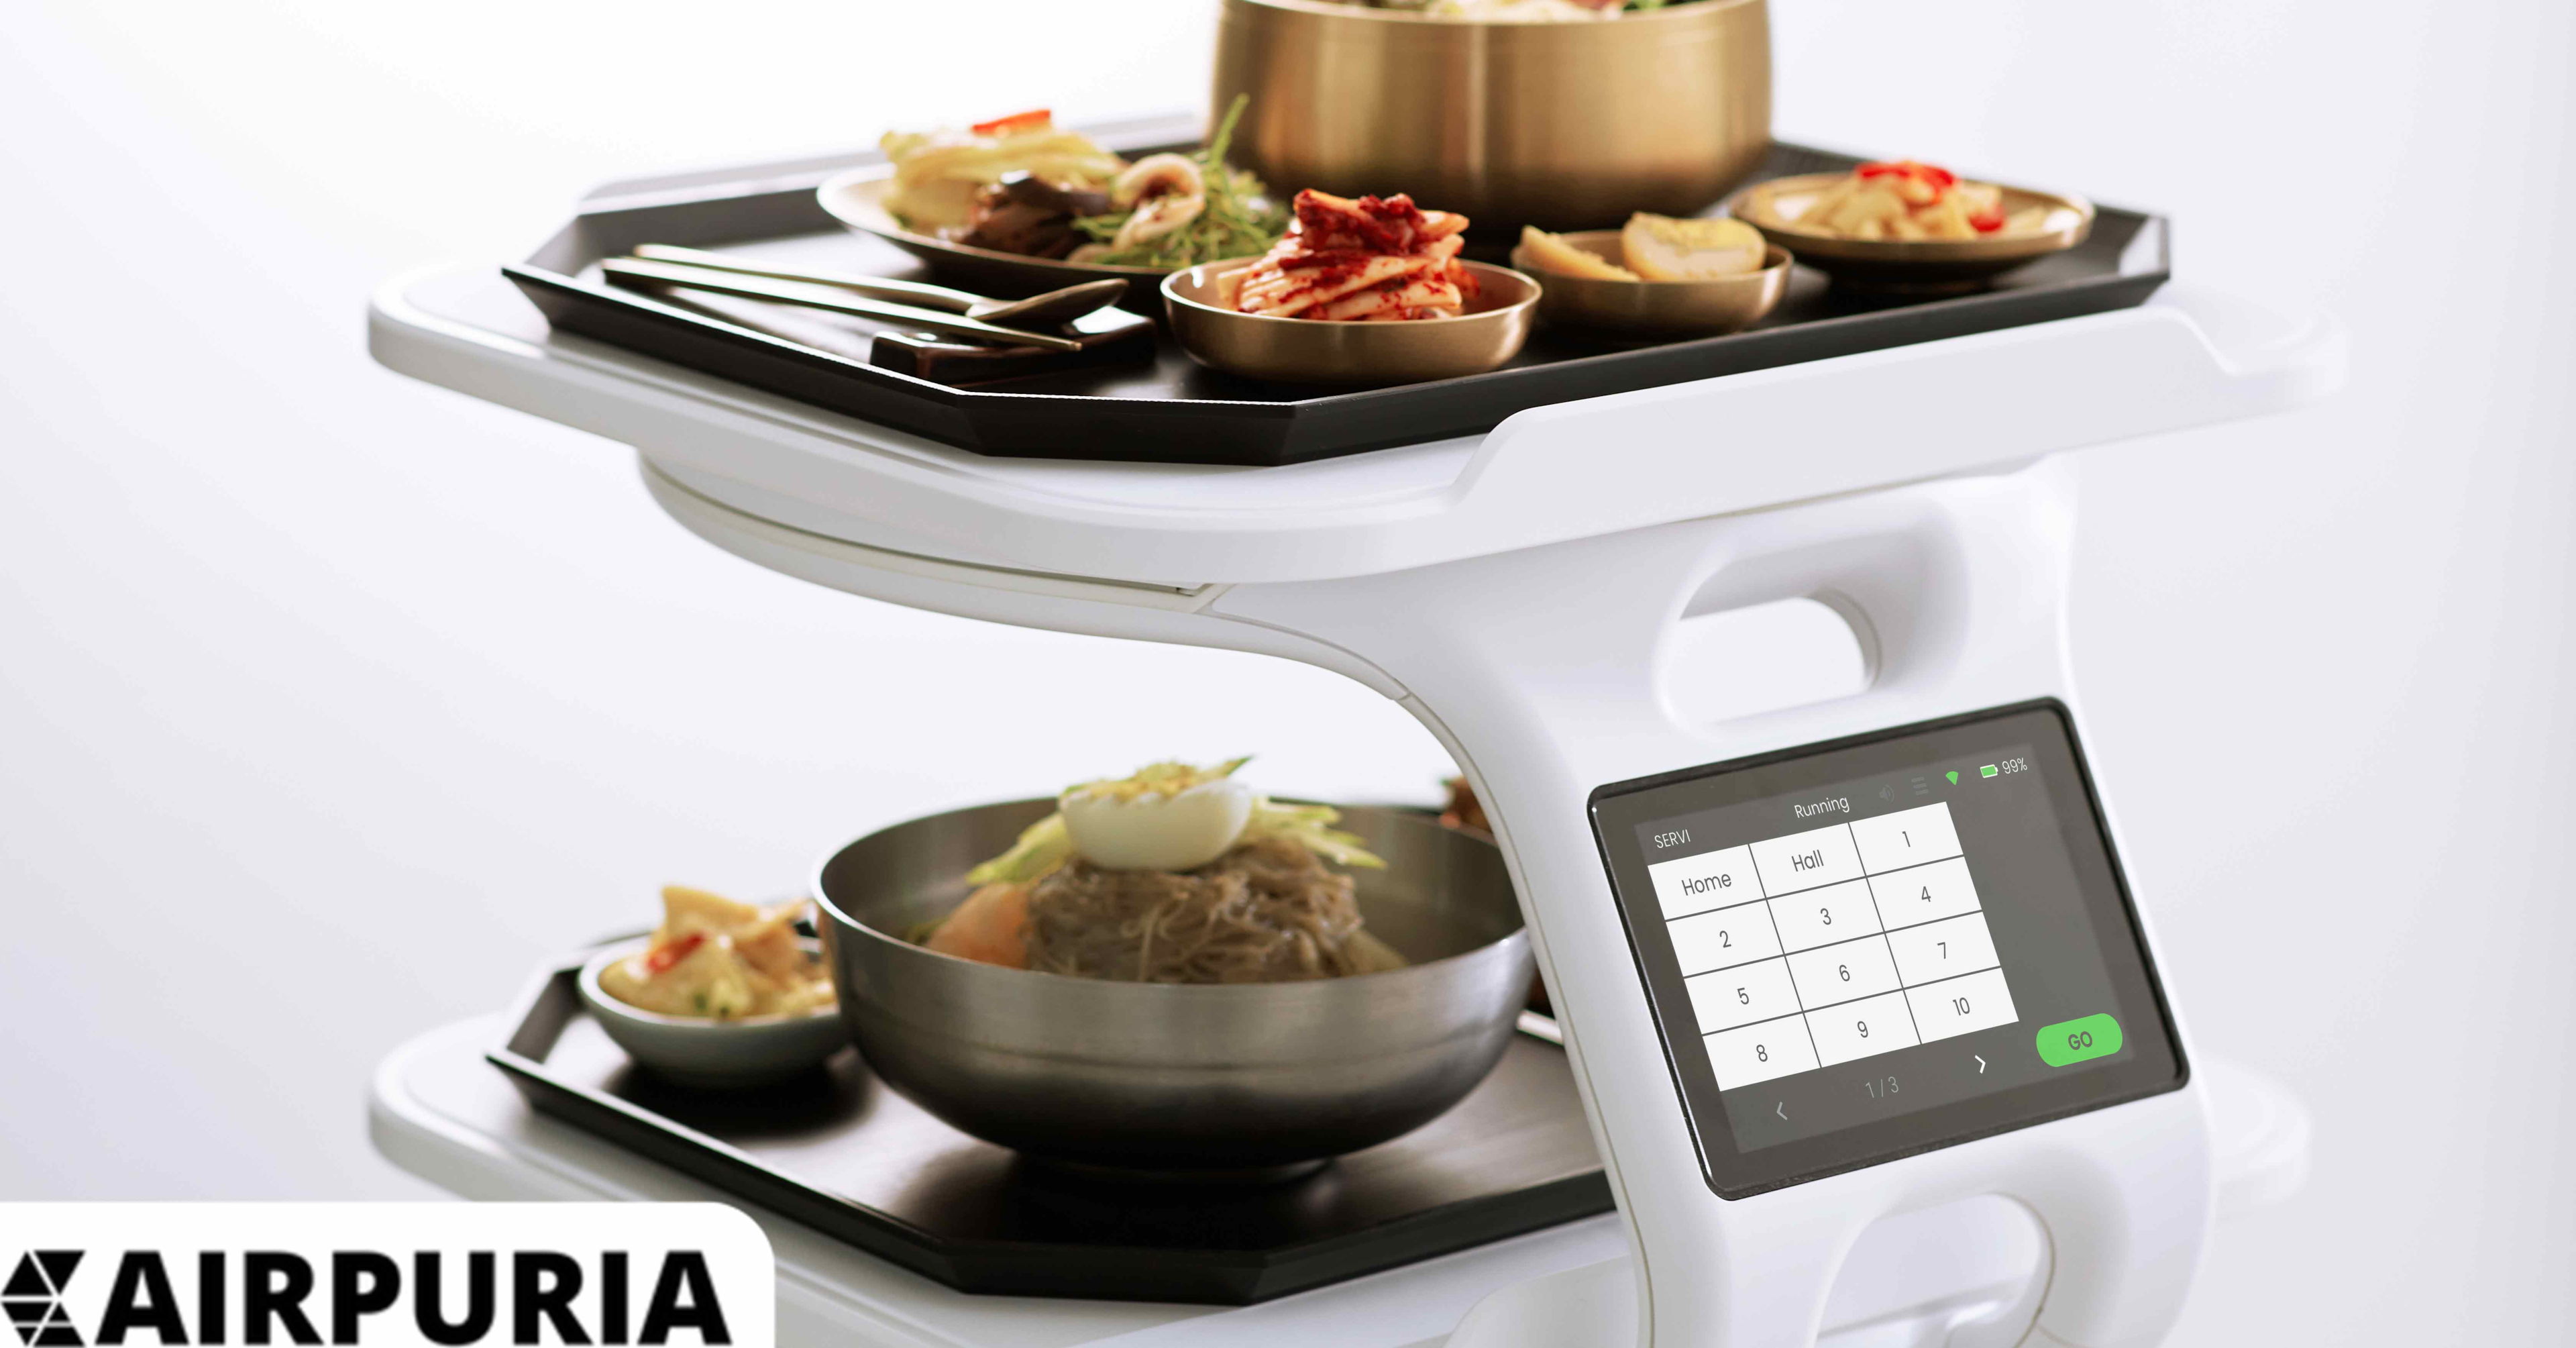 Company relying on technology - food service robot Servi - are they efficient?